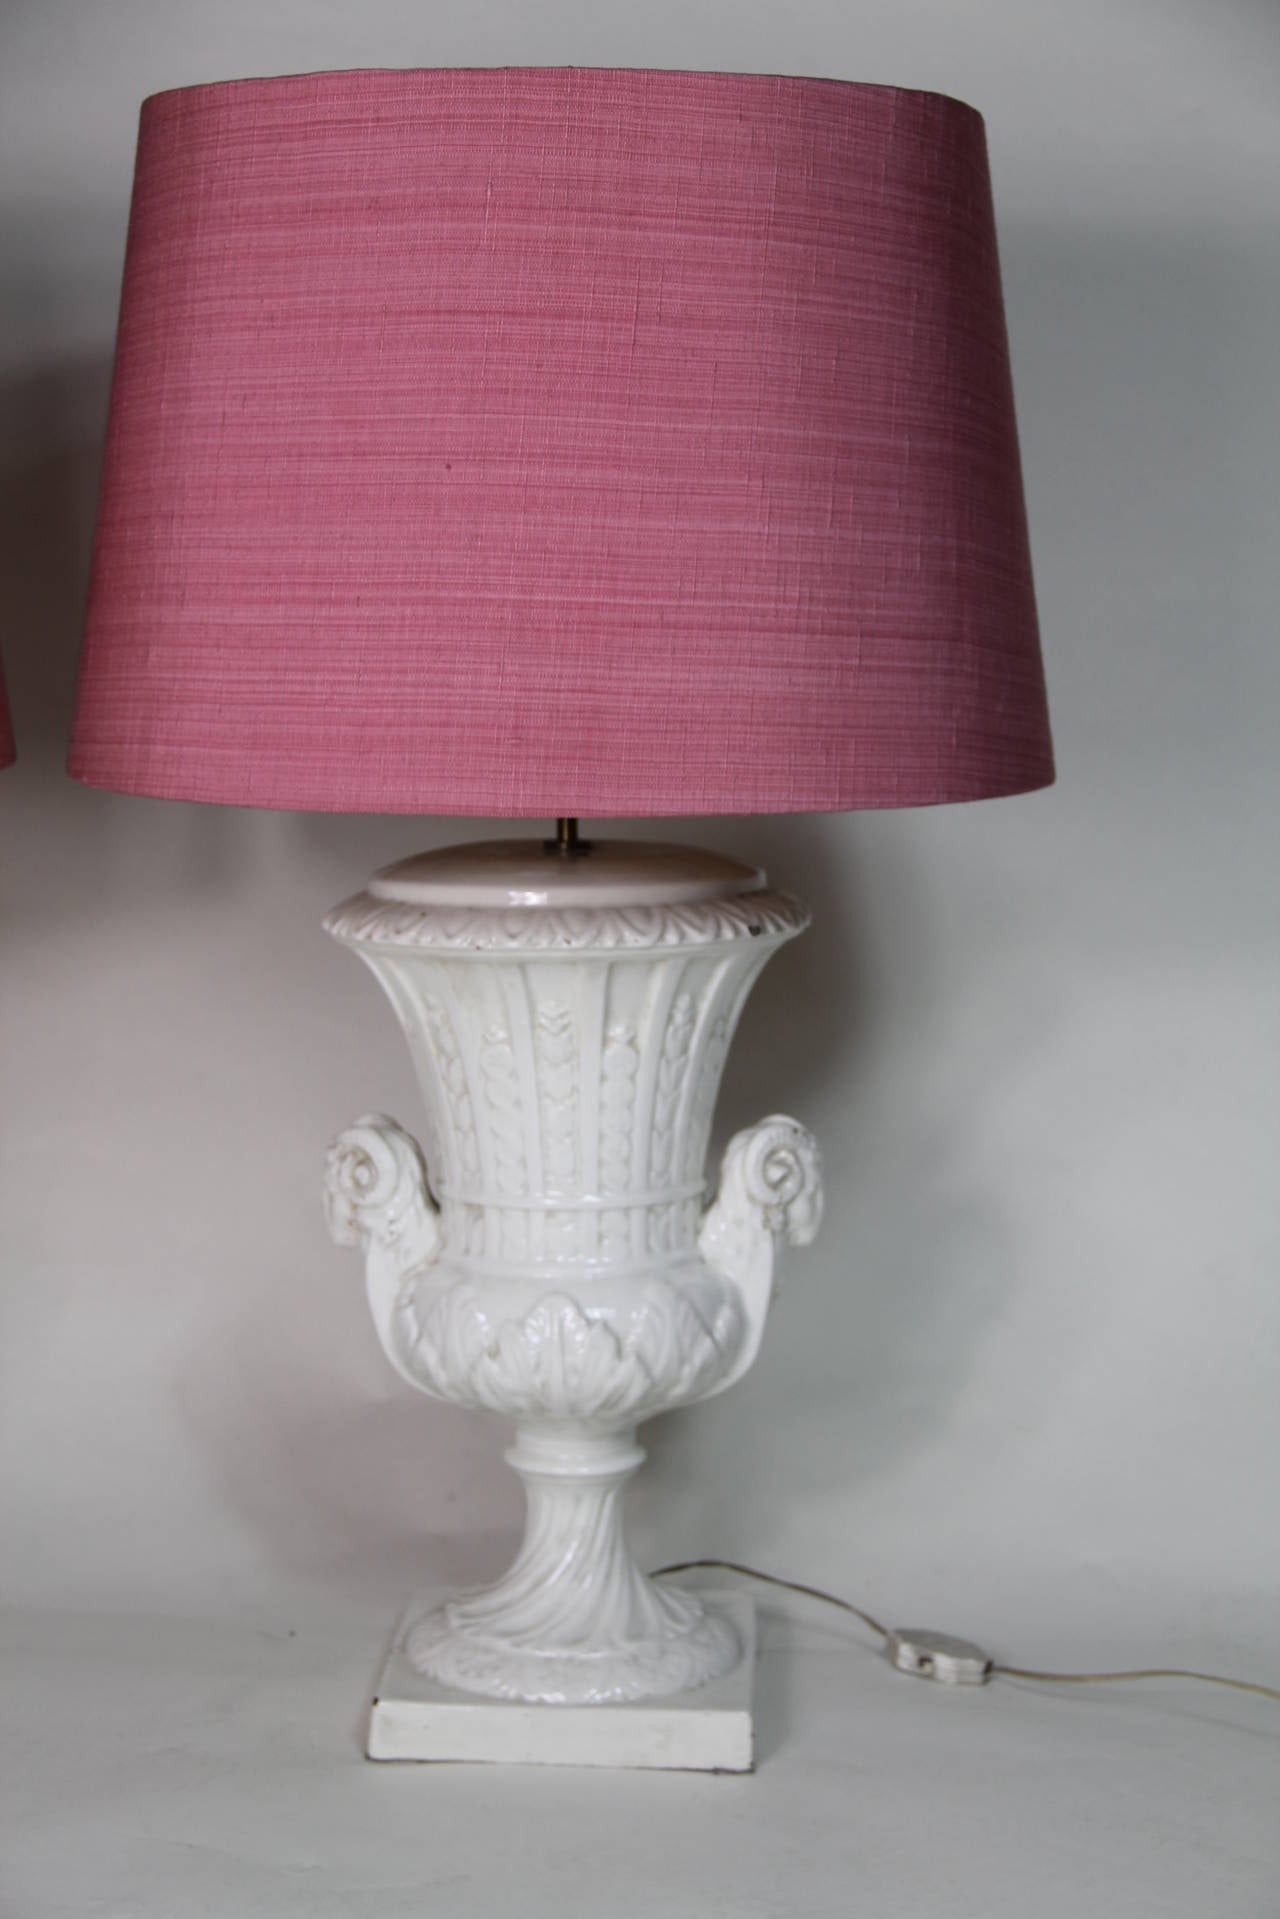 A pair of white glazed ceramic urns as table lamps with original pink silk shades